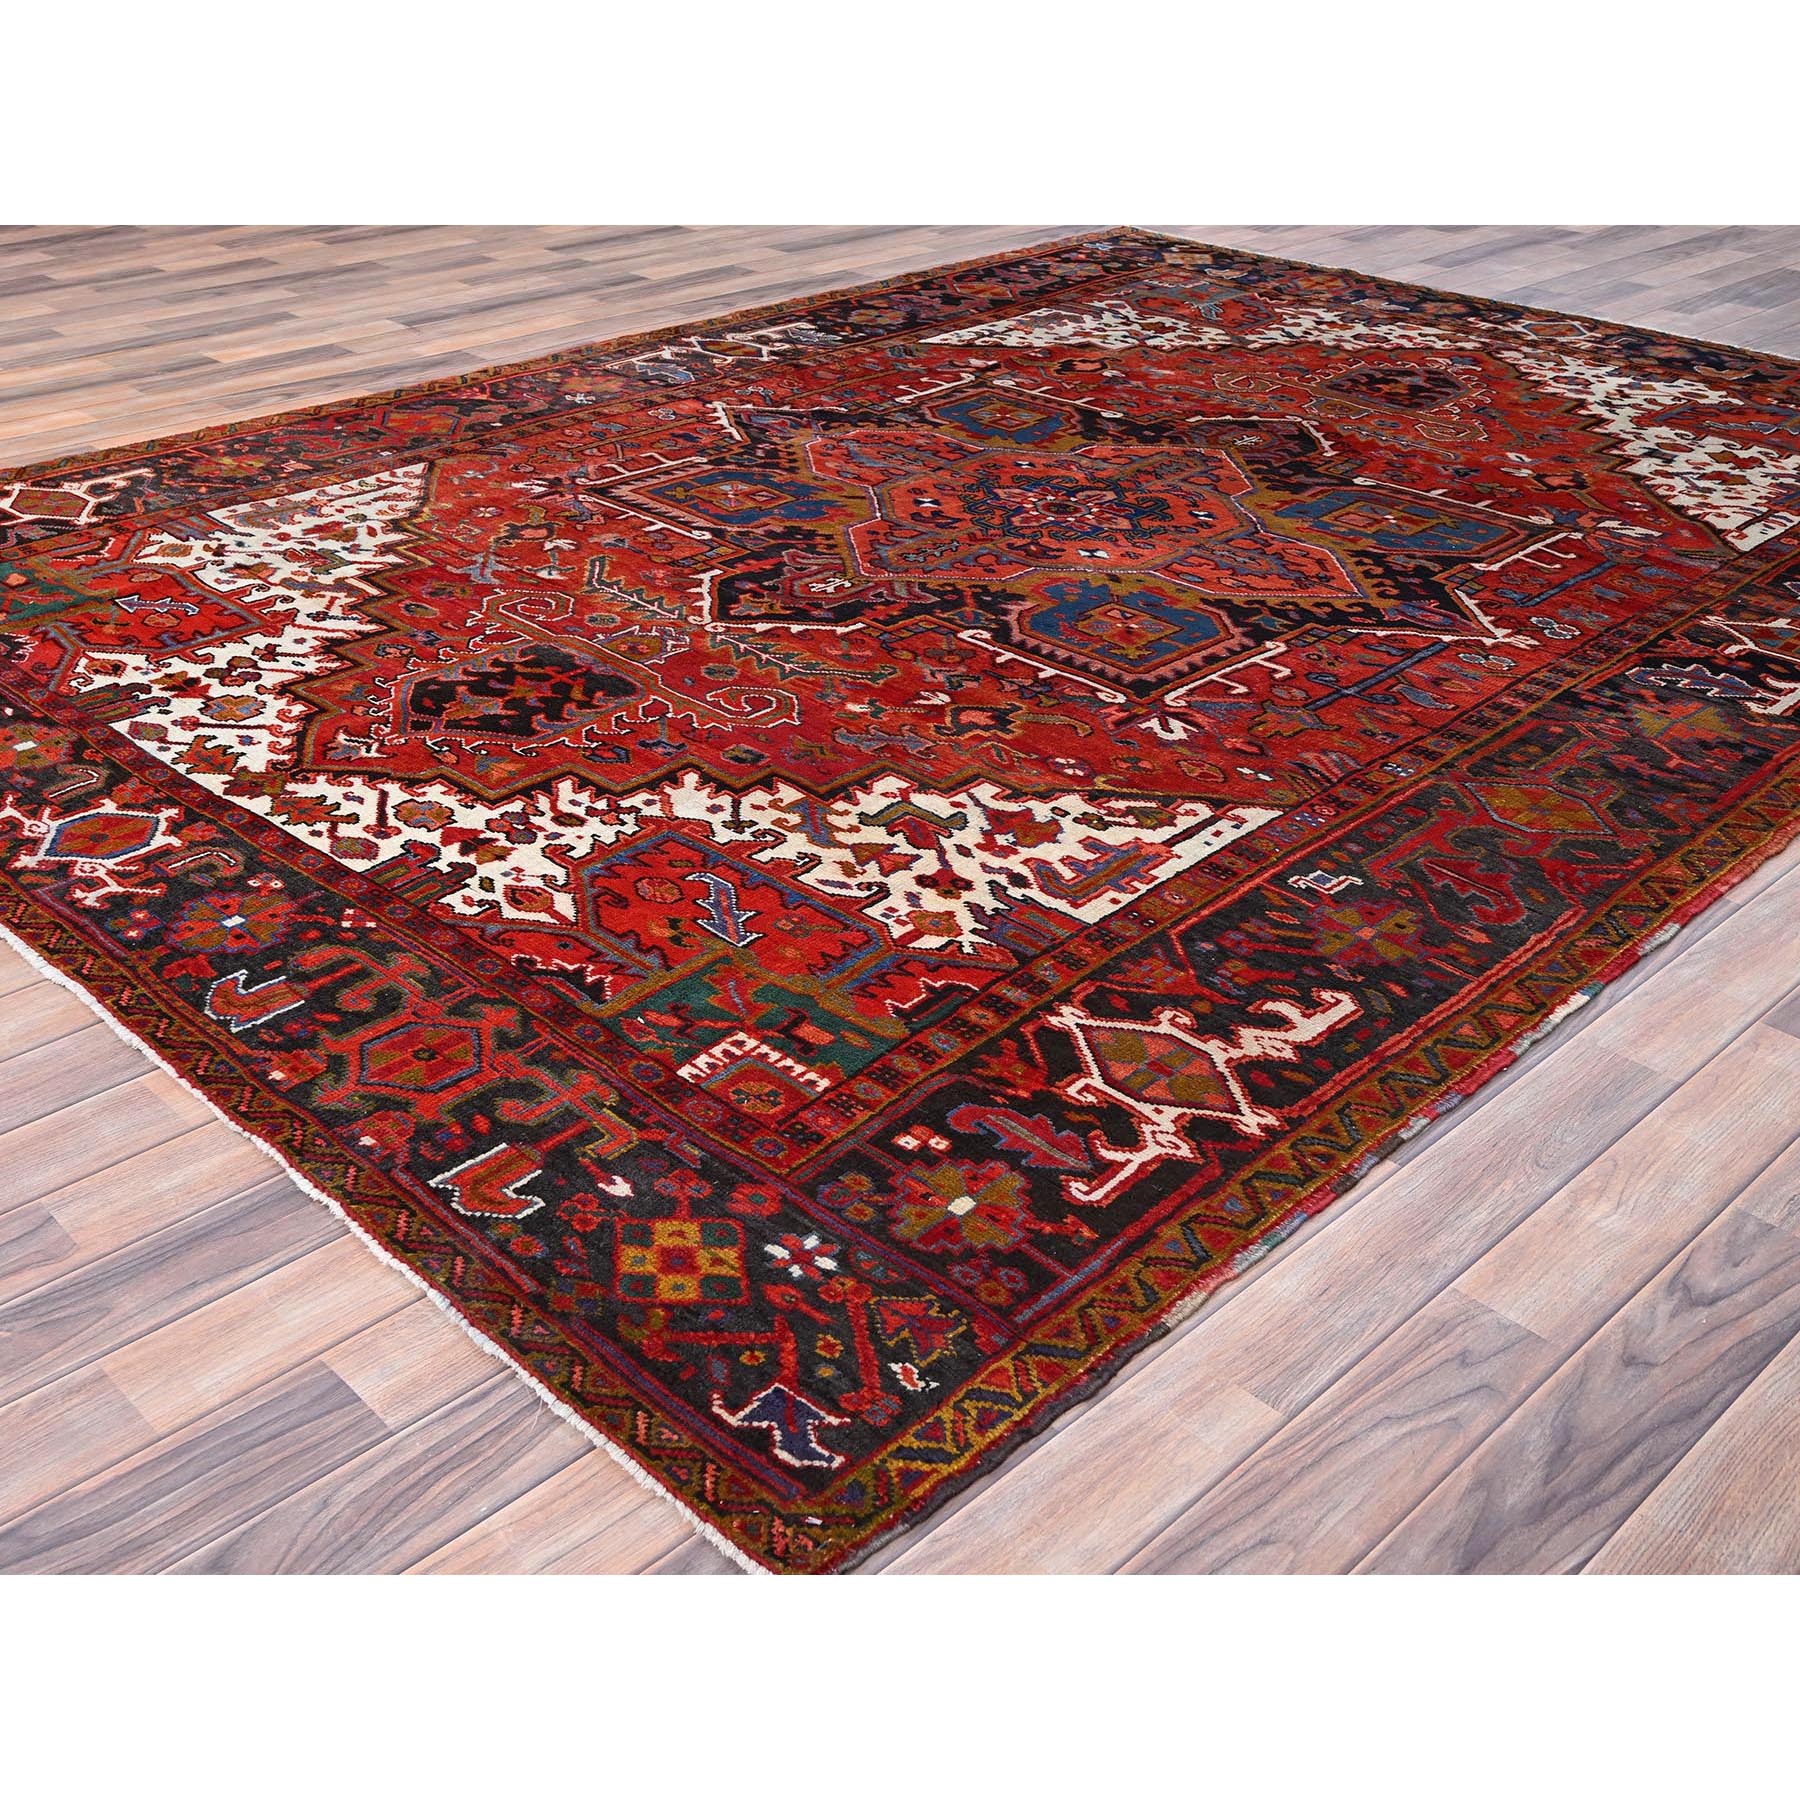 8'x10'8" Fire Brick Red, Rustic Look, Worn Wool, Hand Woven, Vintage Persian Heriz with Tribal Ambience, Good Condition, Oriental Rug 